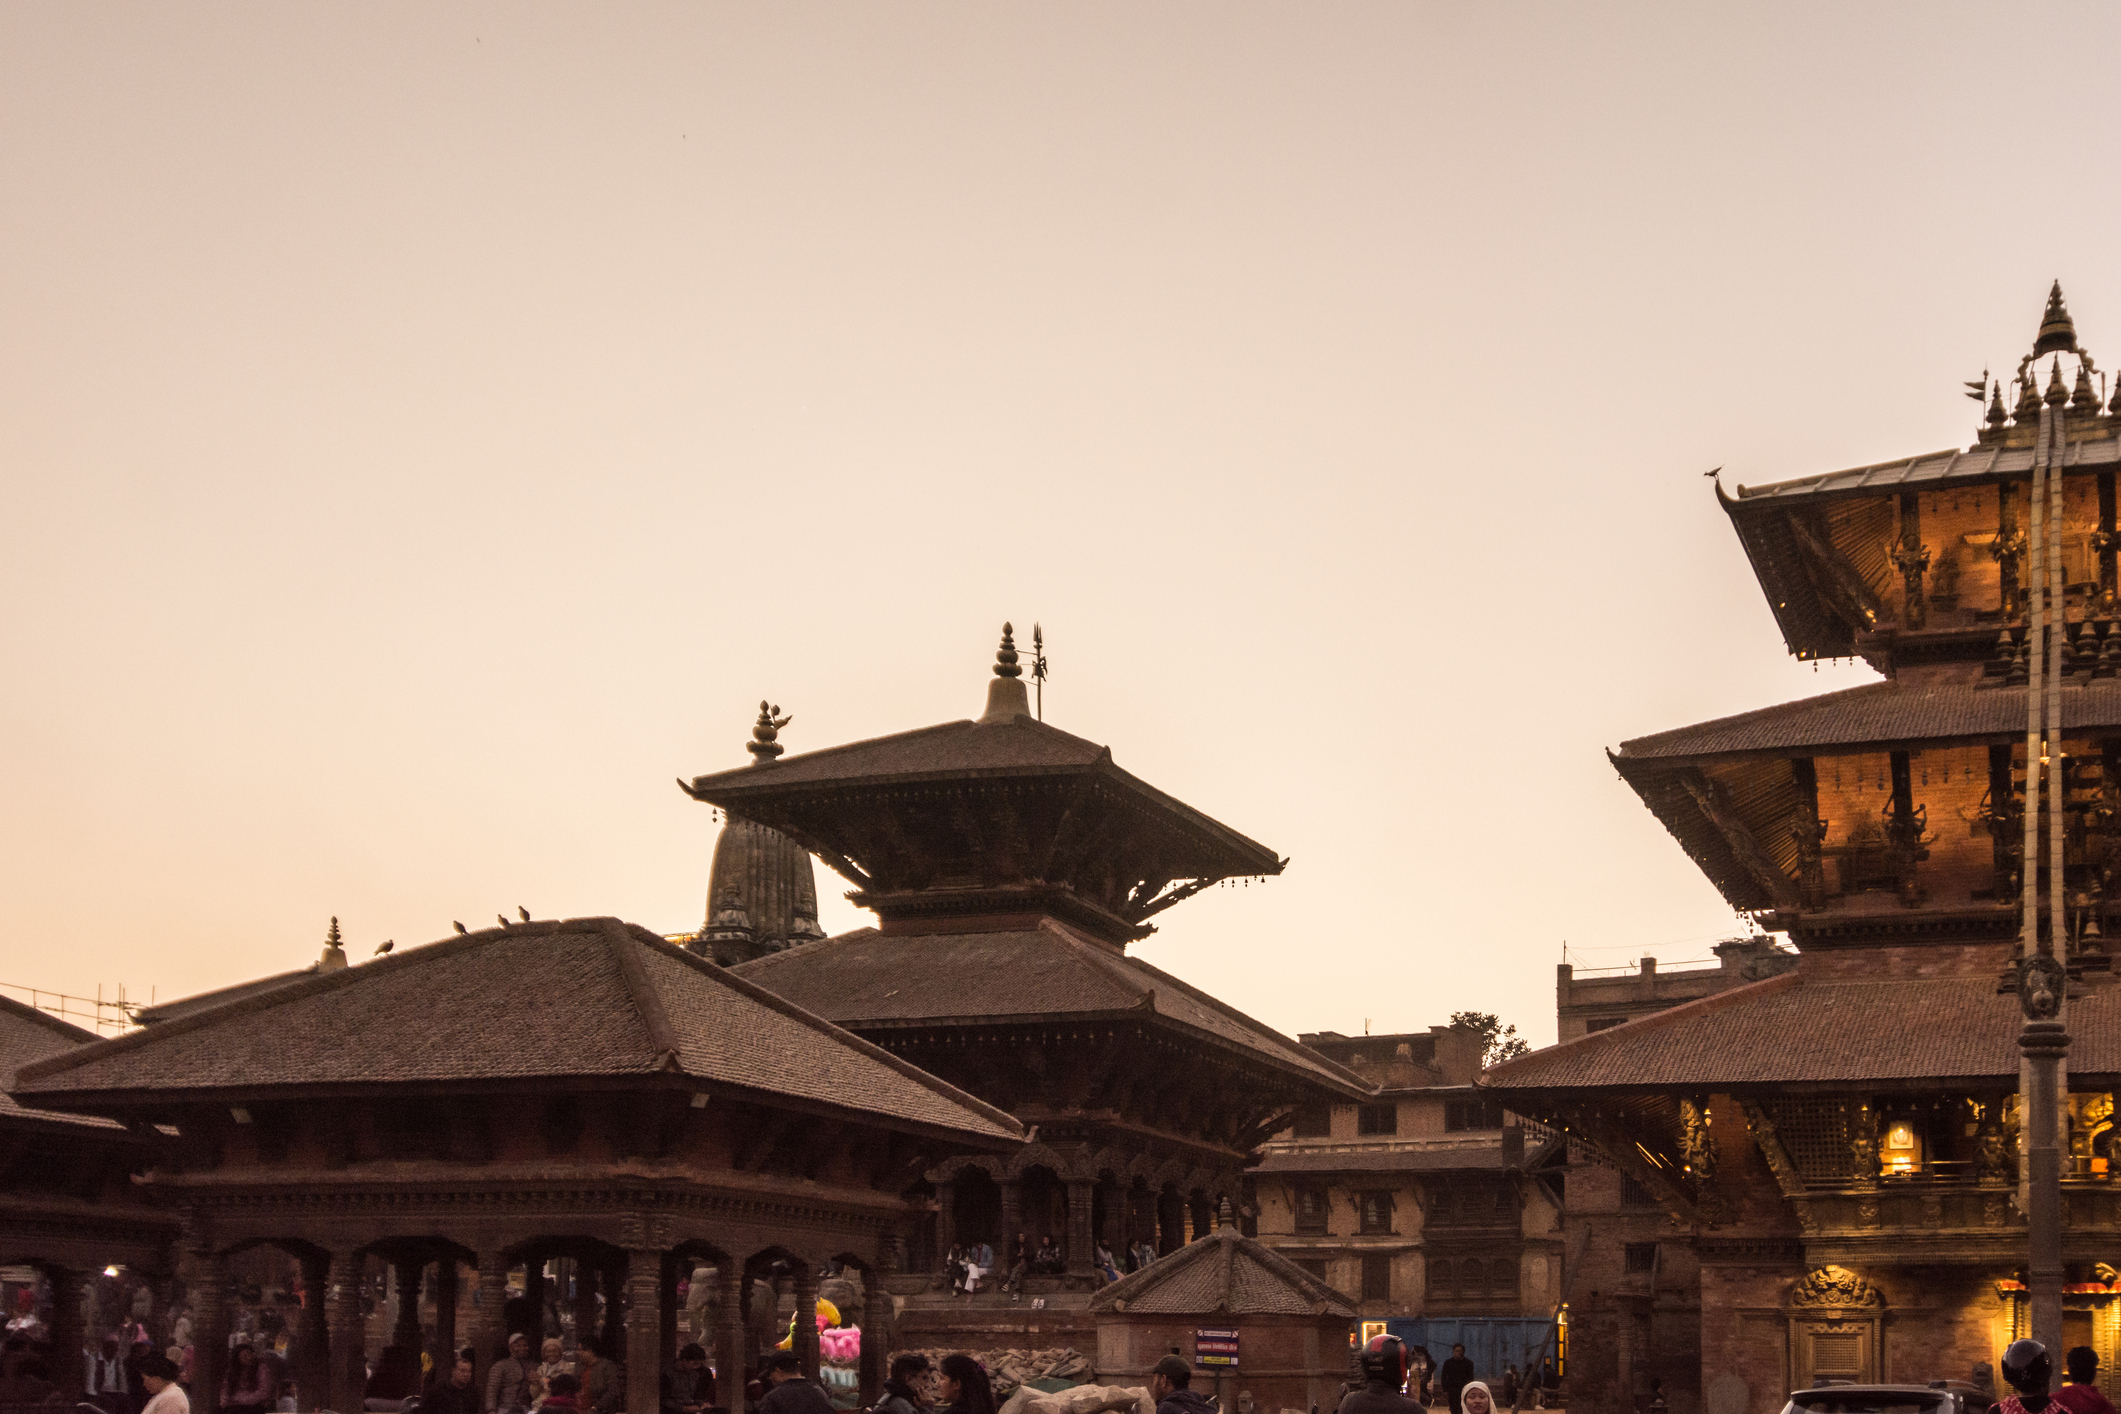 Durbar Square, Patan, with sunset sky background - stock photo